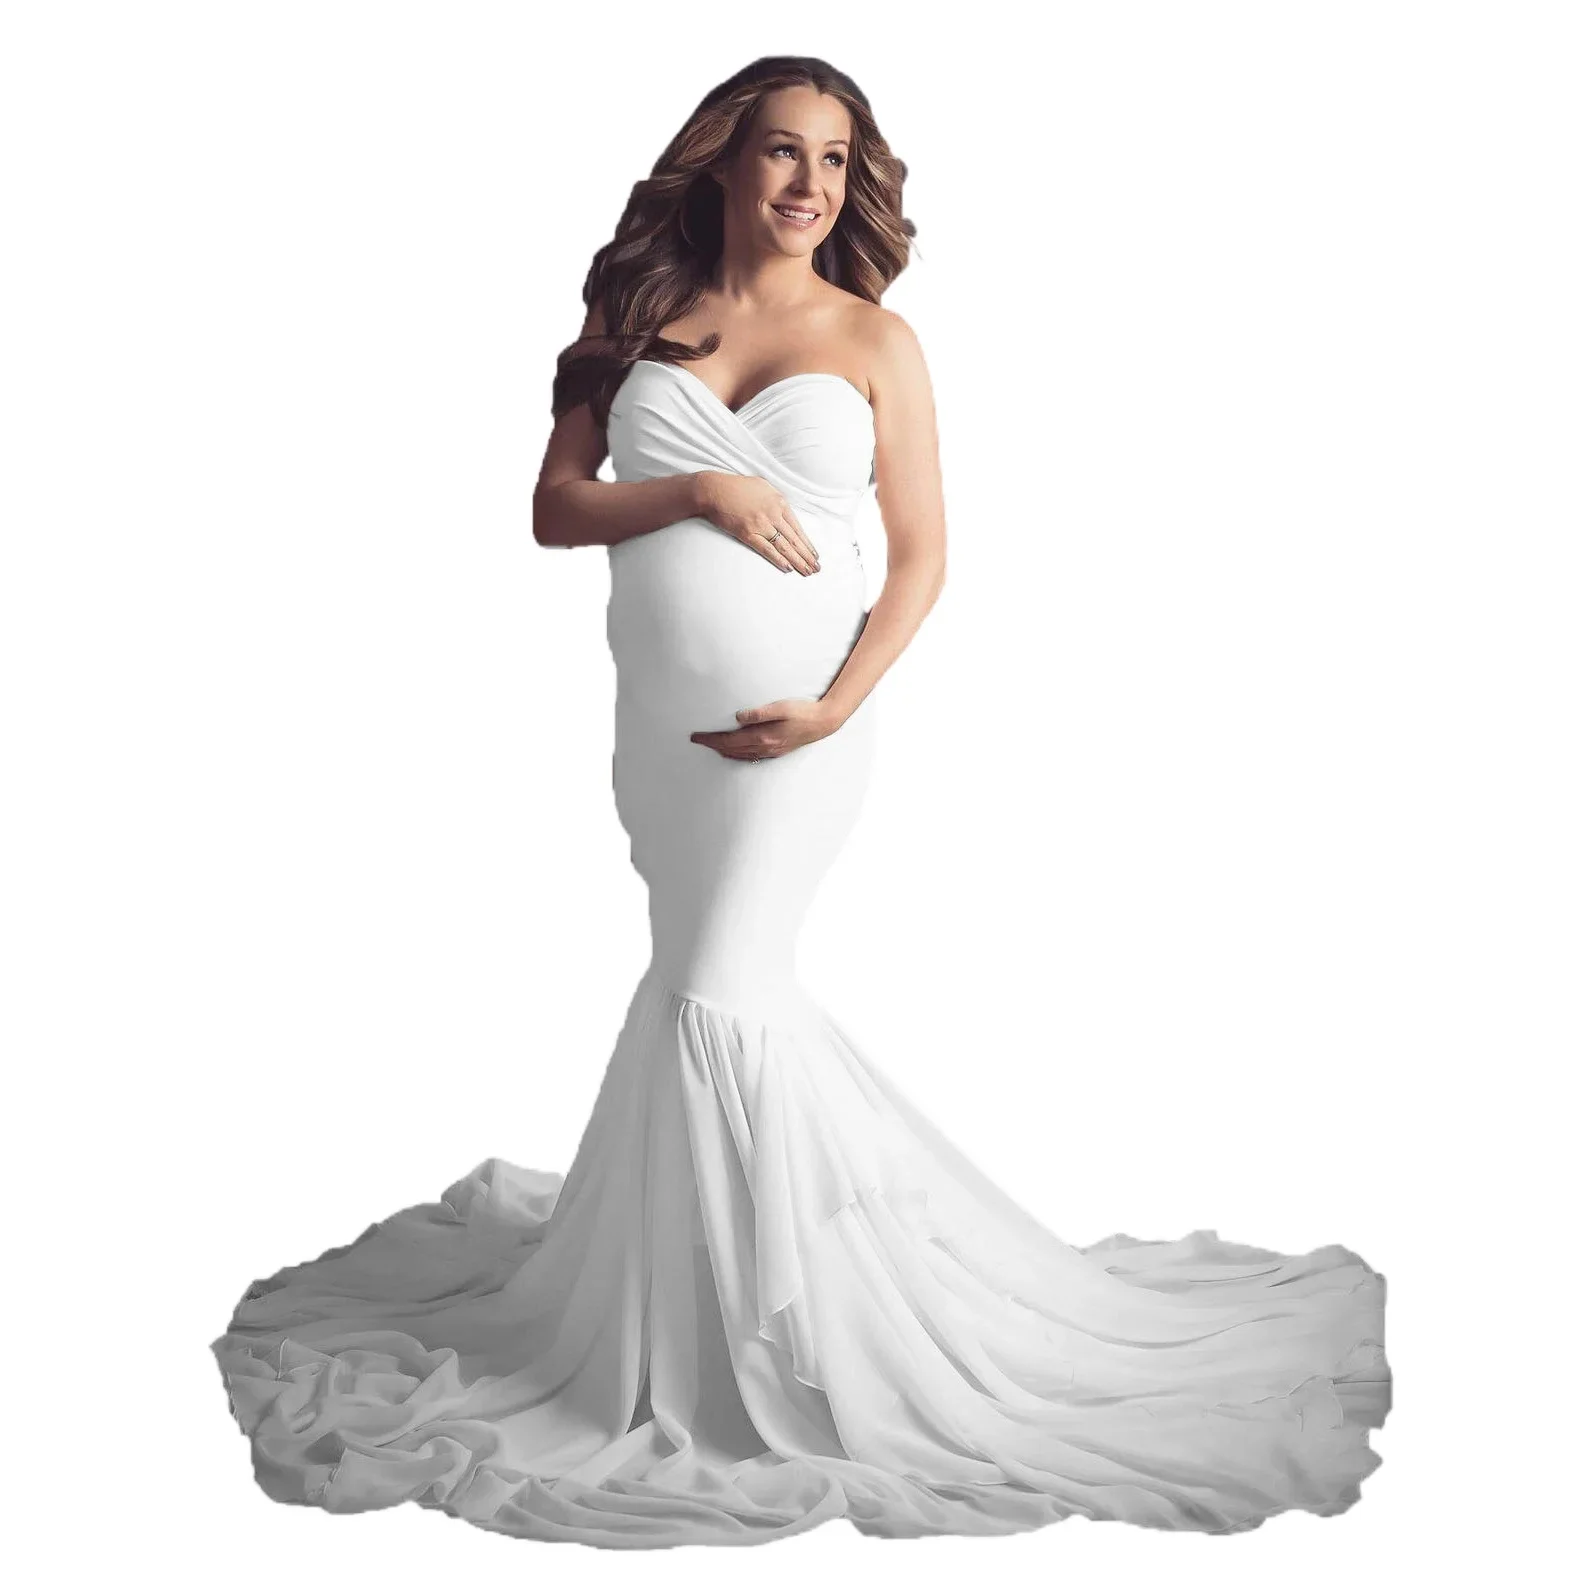 

Women Off Shoulder Strapless Tired Mermaid Maternity Dress Elegant Fitted Chiffon Gown for Photoshoot Photography Baby Shower